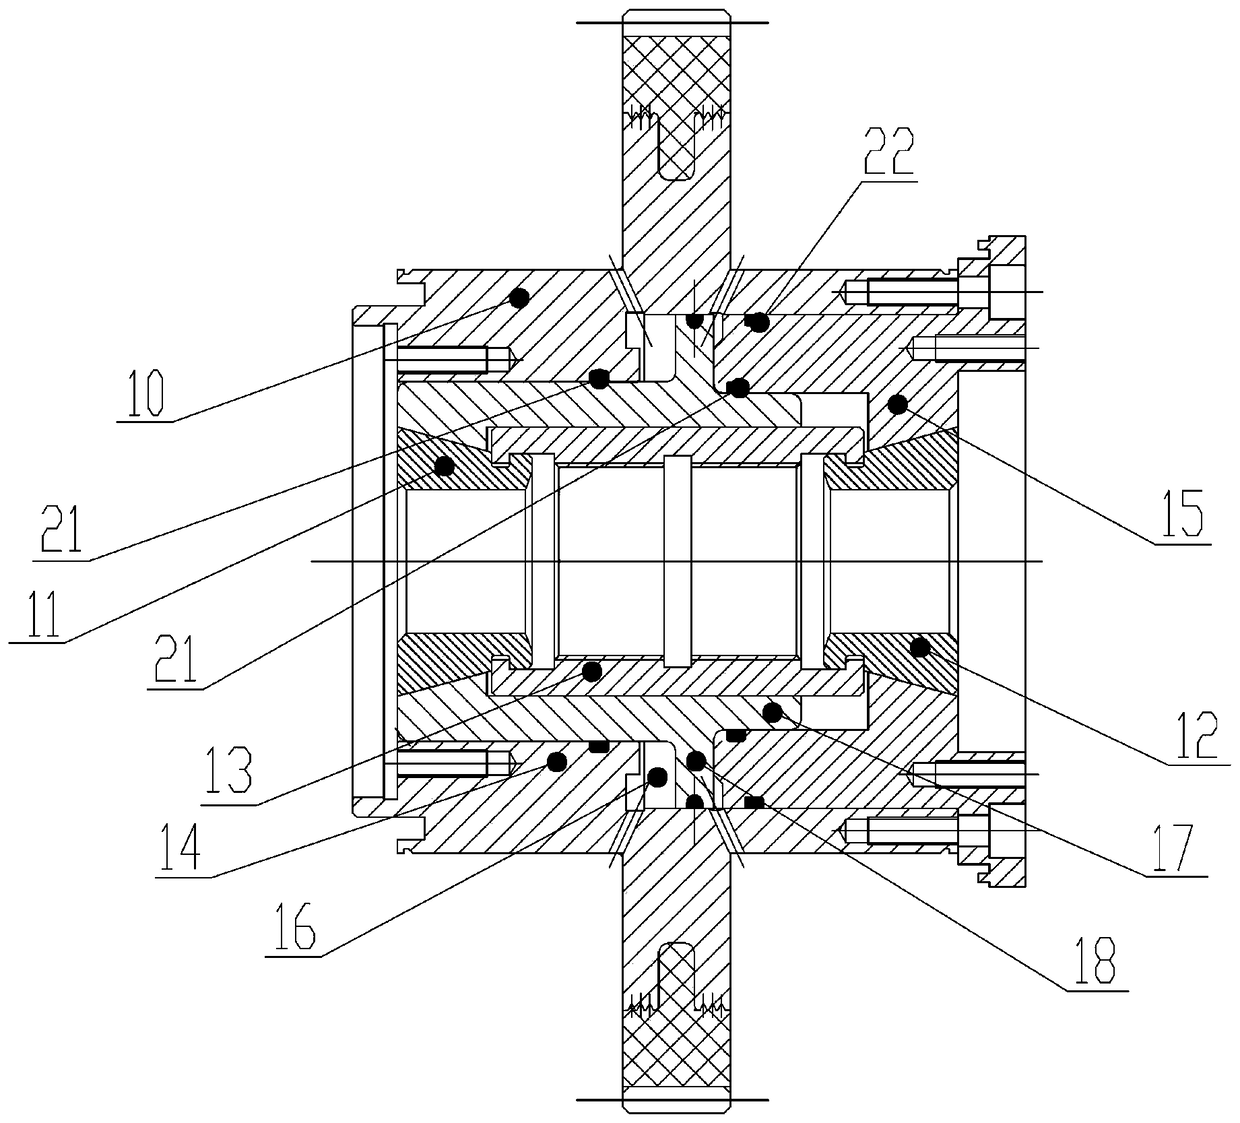 The structure of the pressure cylinder driving the double-ended collet in the main shaft